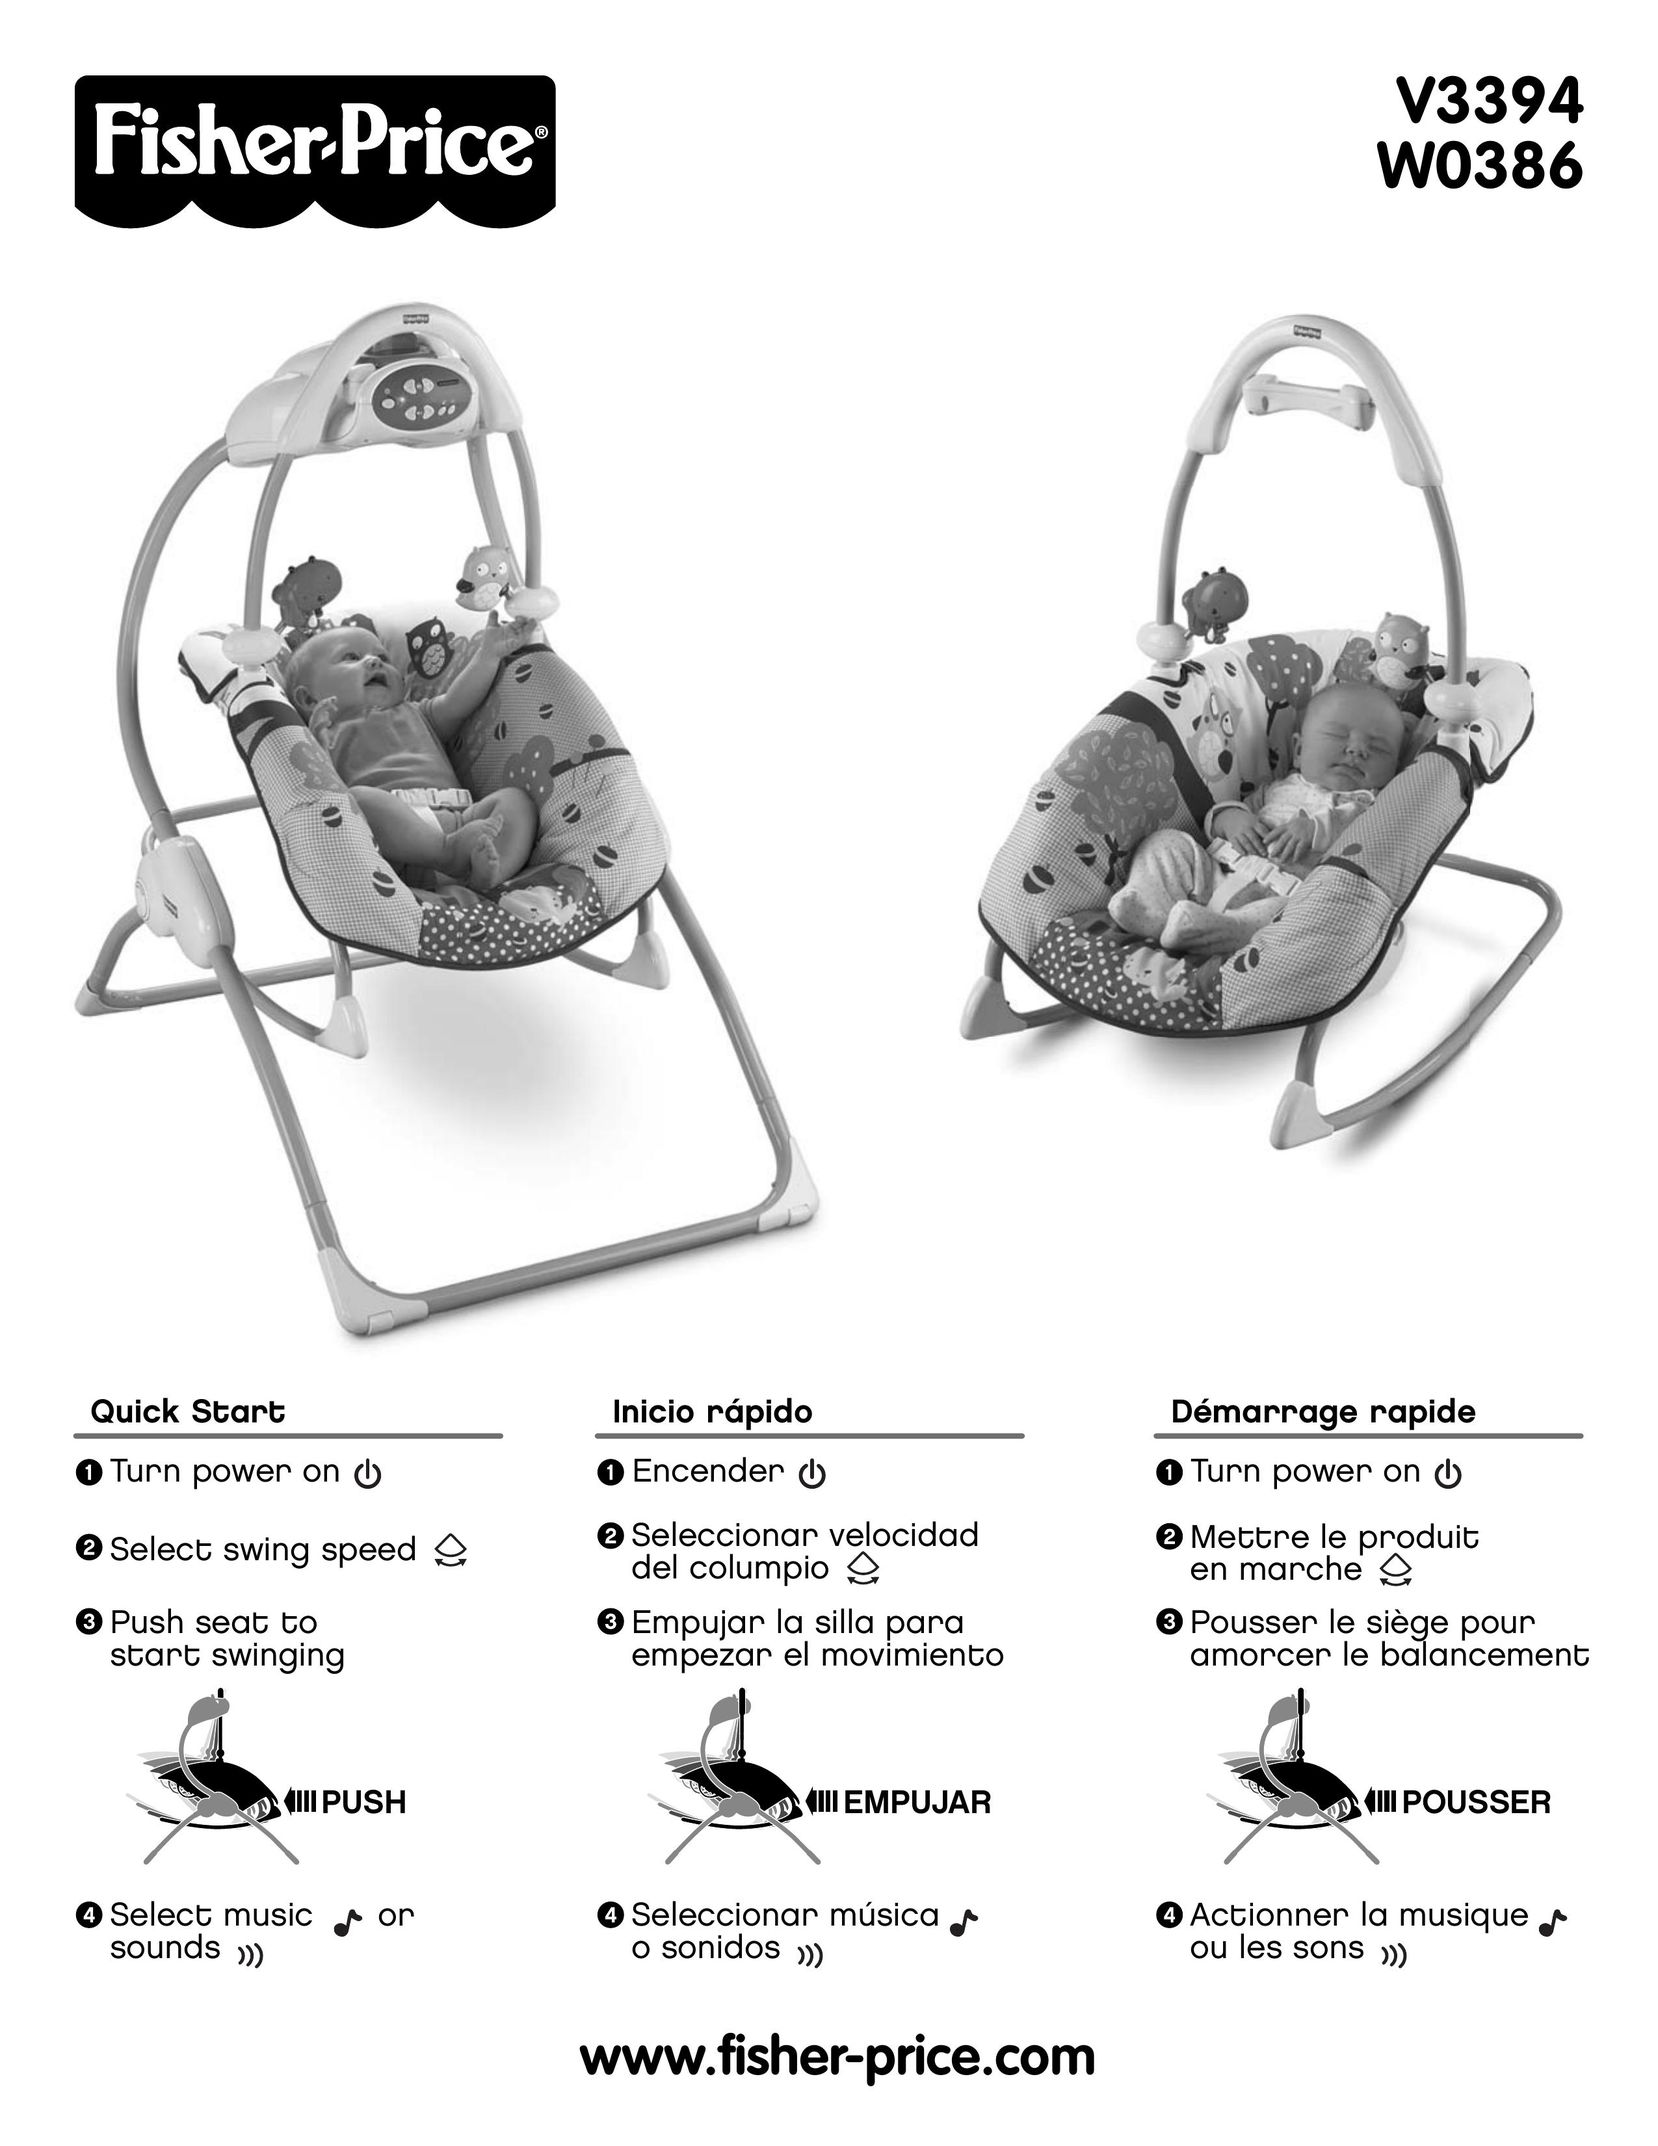 Fisher-Price W0386 Baby Swing User Manual